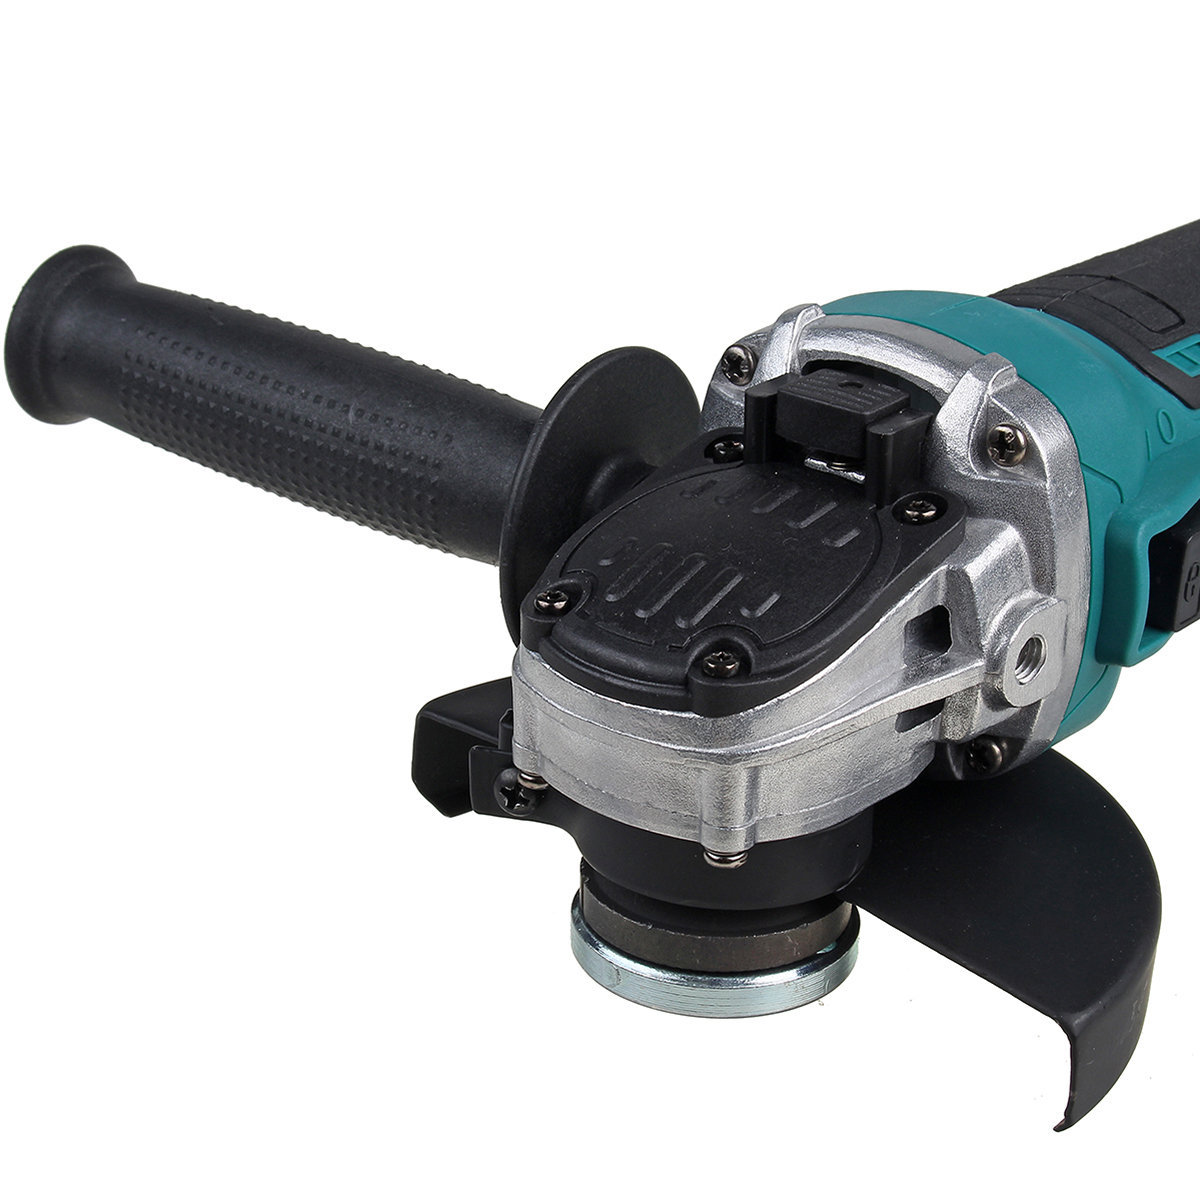 125mm-800W-Cordless-Brushless-Angle-Grinder-Cutting-Tool-Variable-Speed-Electric-Polisher-For-Makita-1825761-10